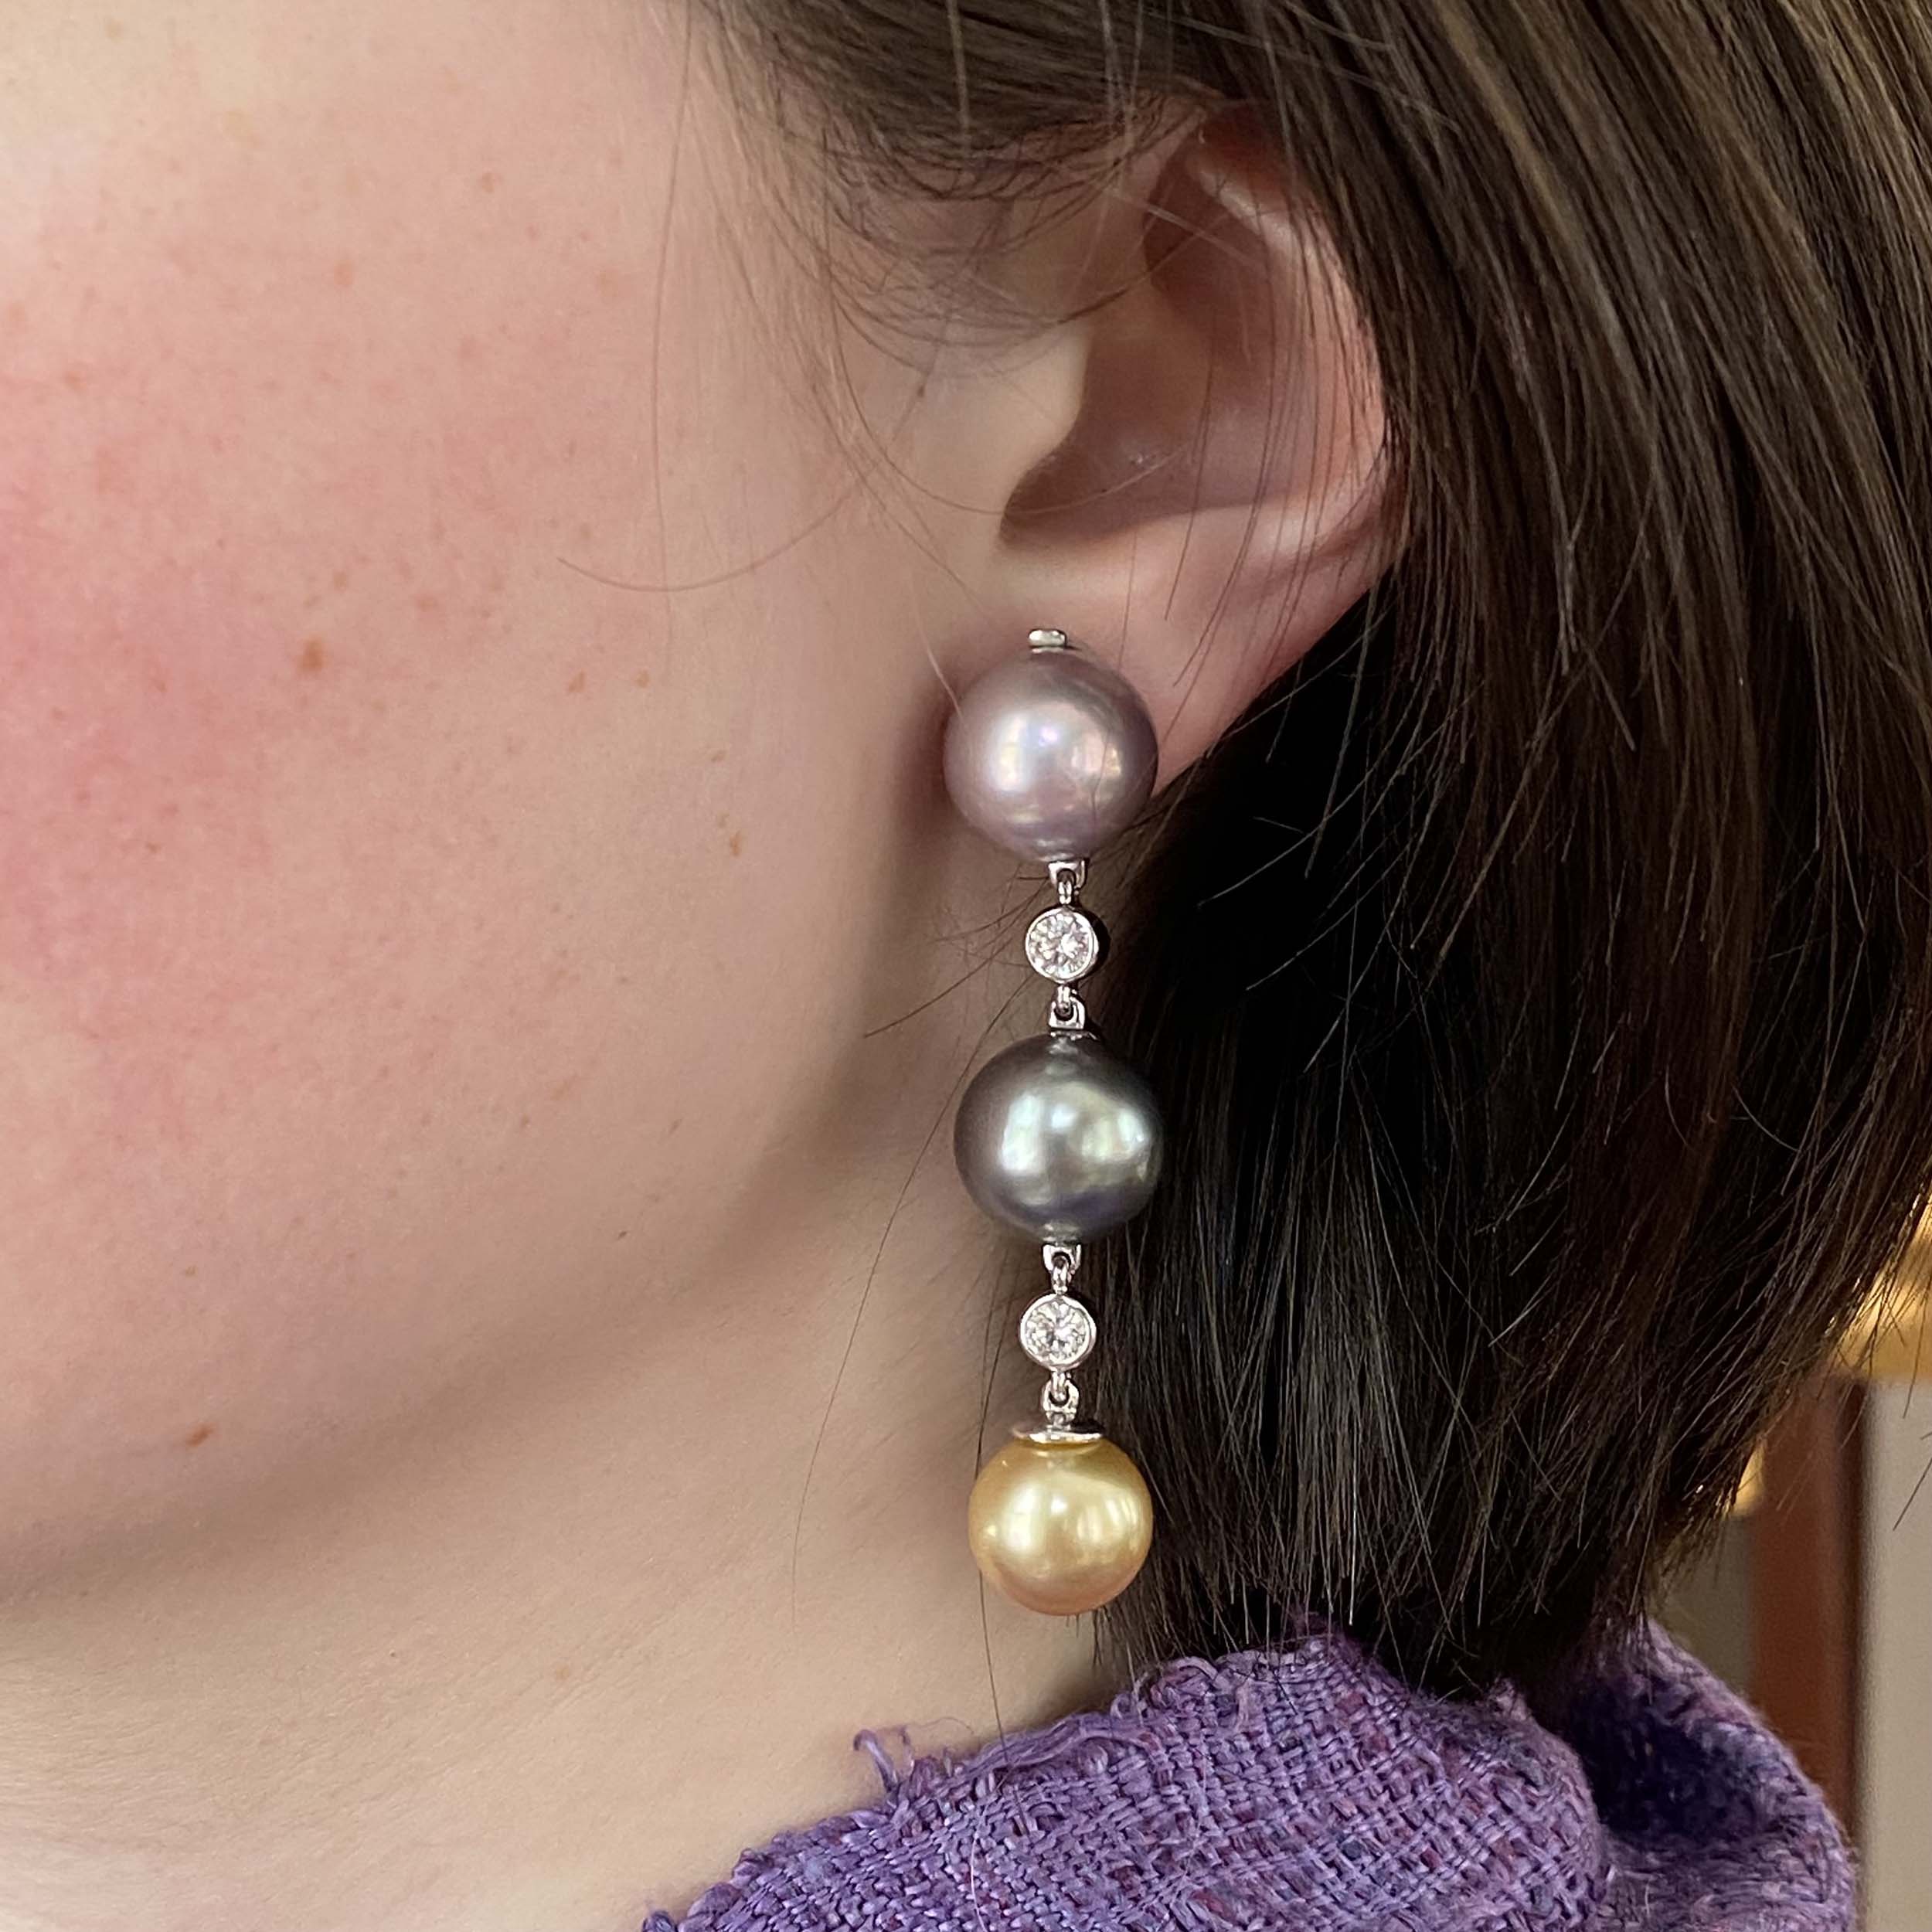 Three 13mm pearls and diamond earrings on a woman's ear